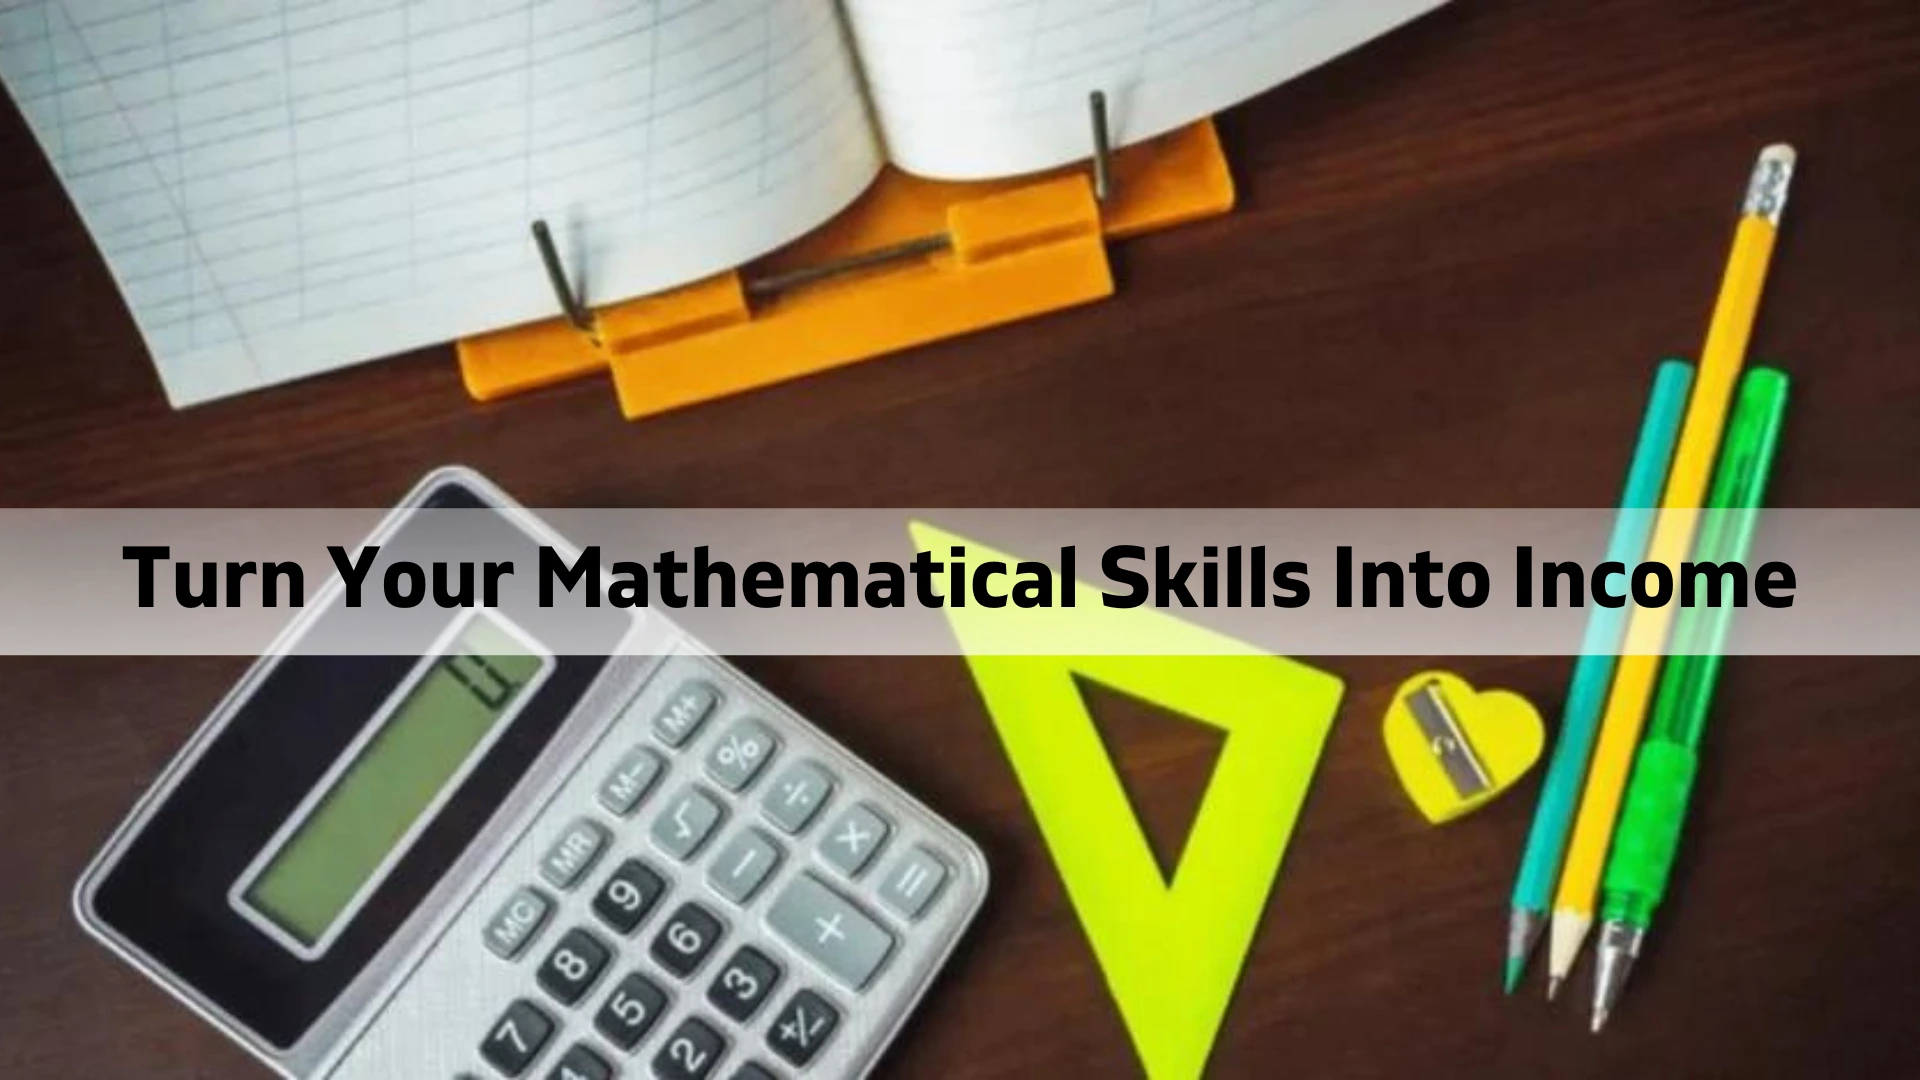 Turn Your Mathematical Skills Into Income